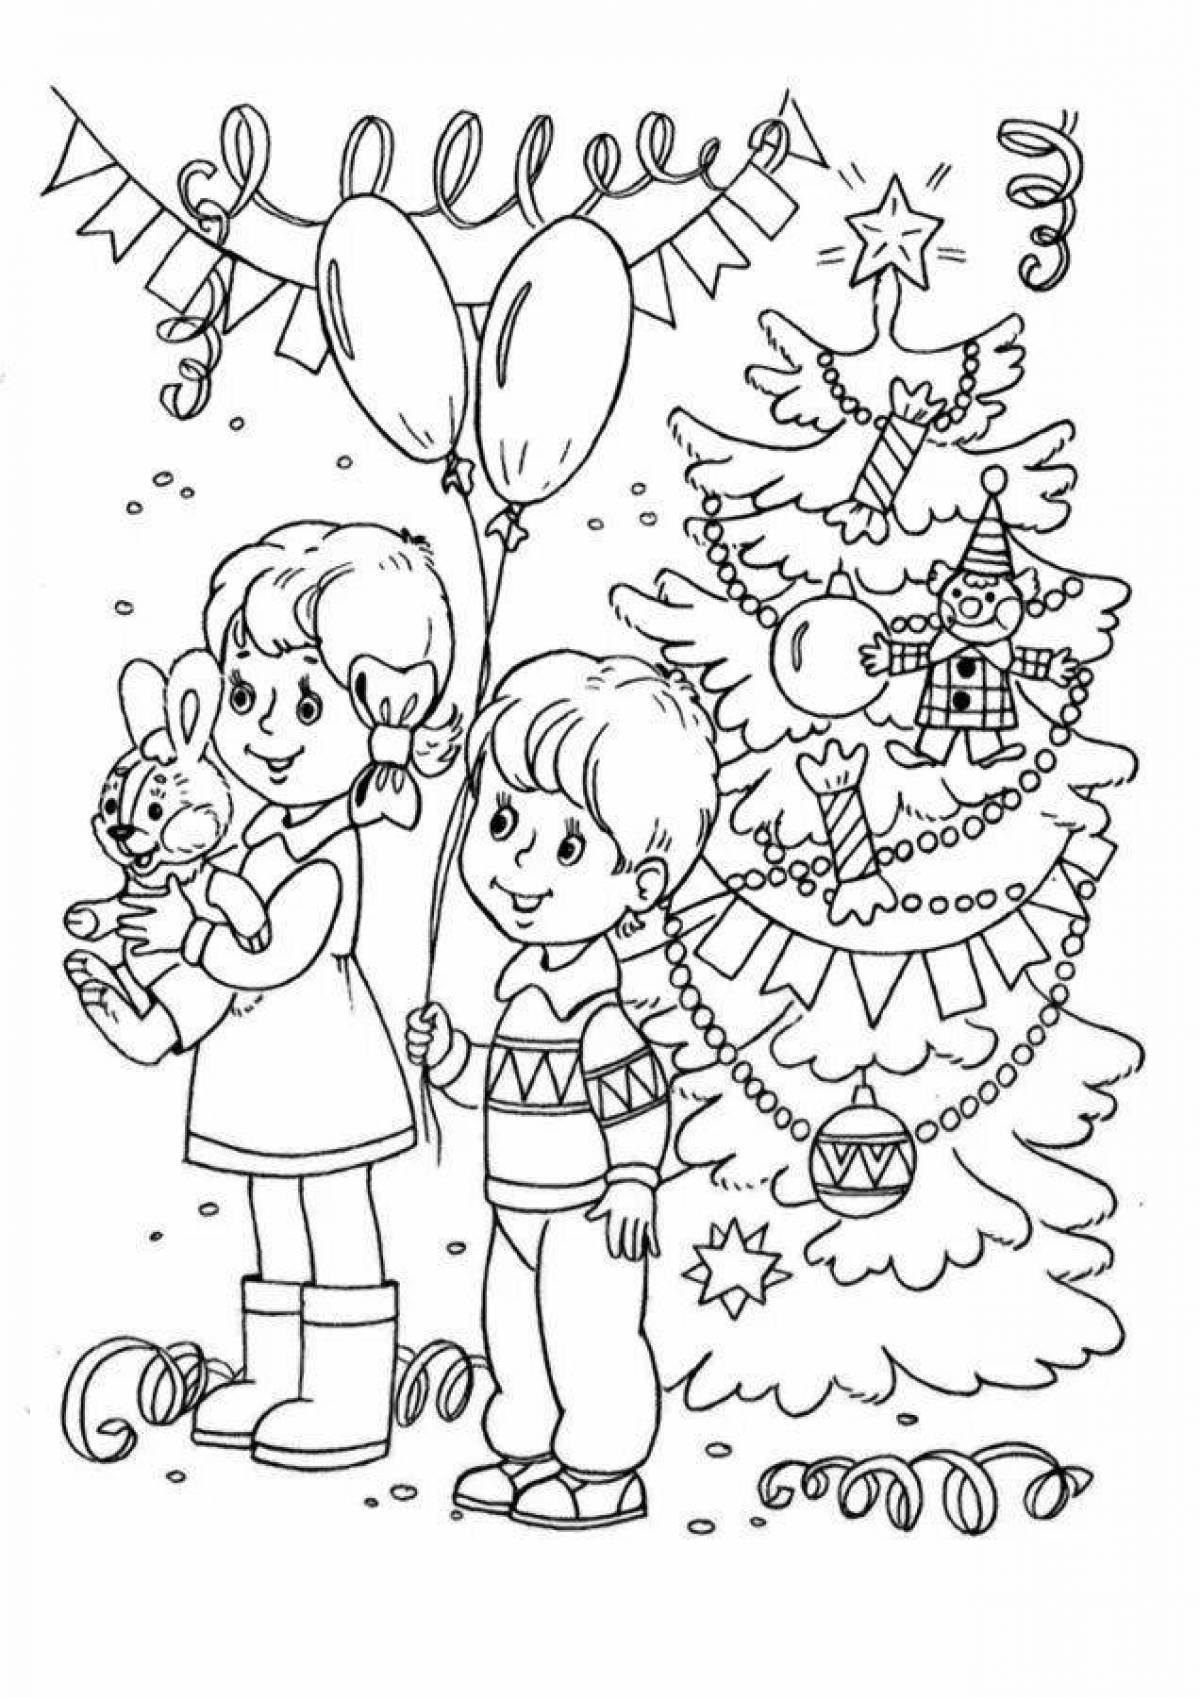 Great holiday coloring book